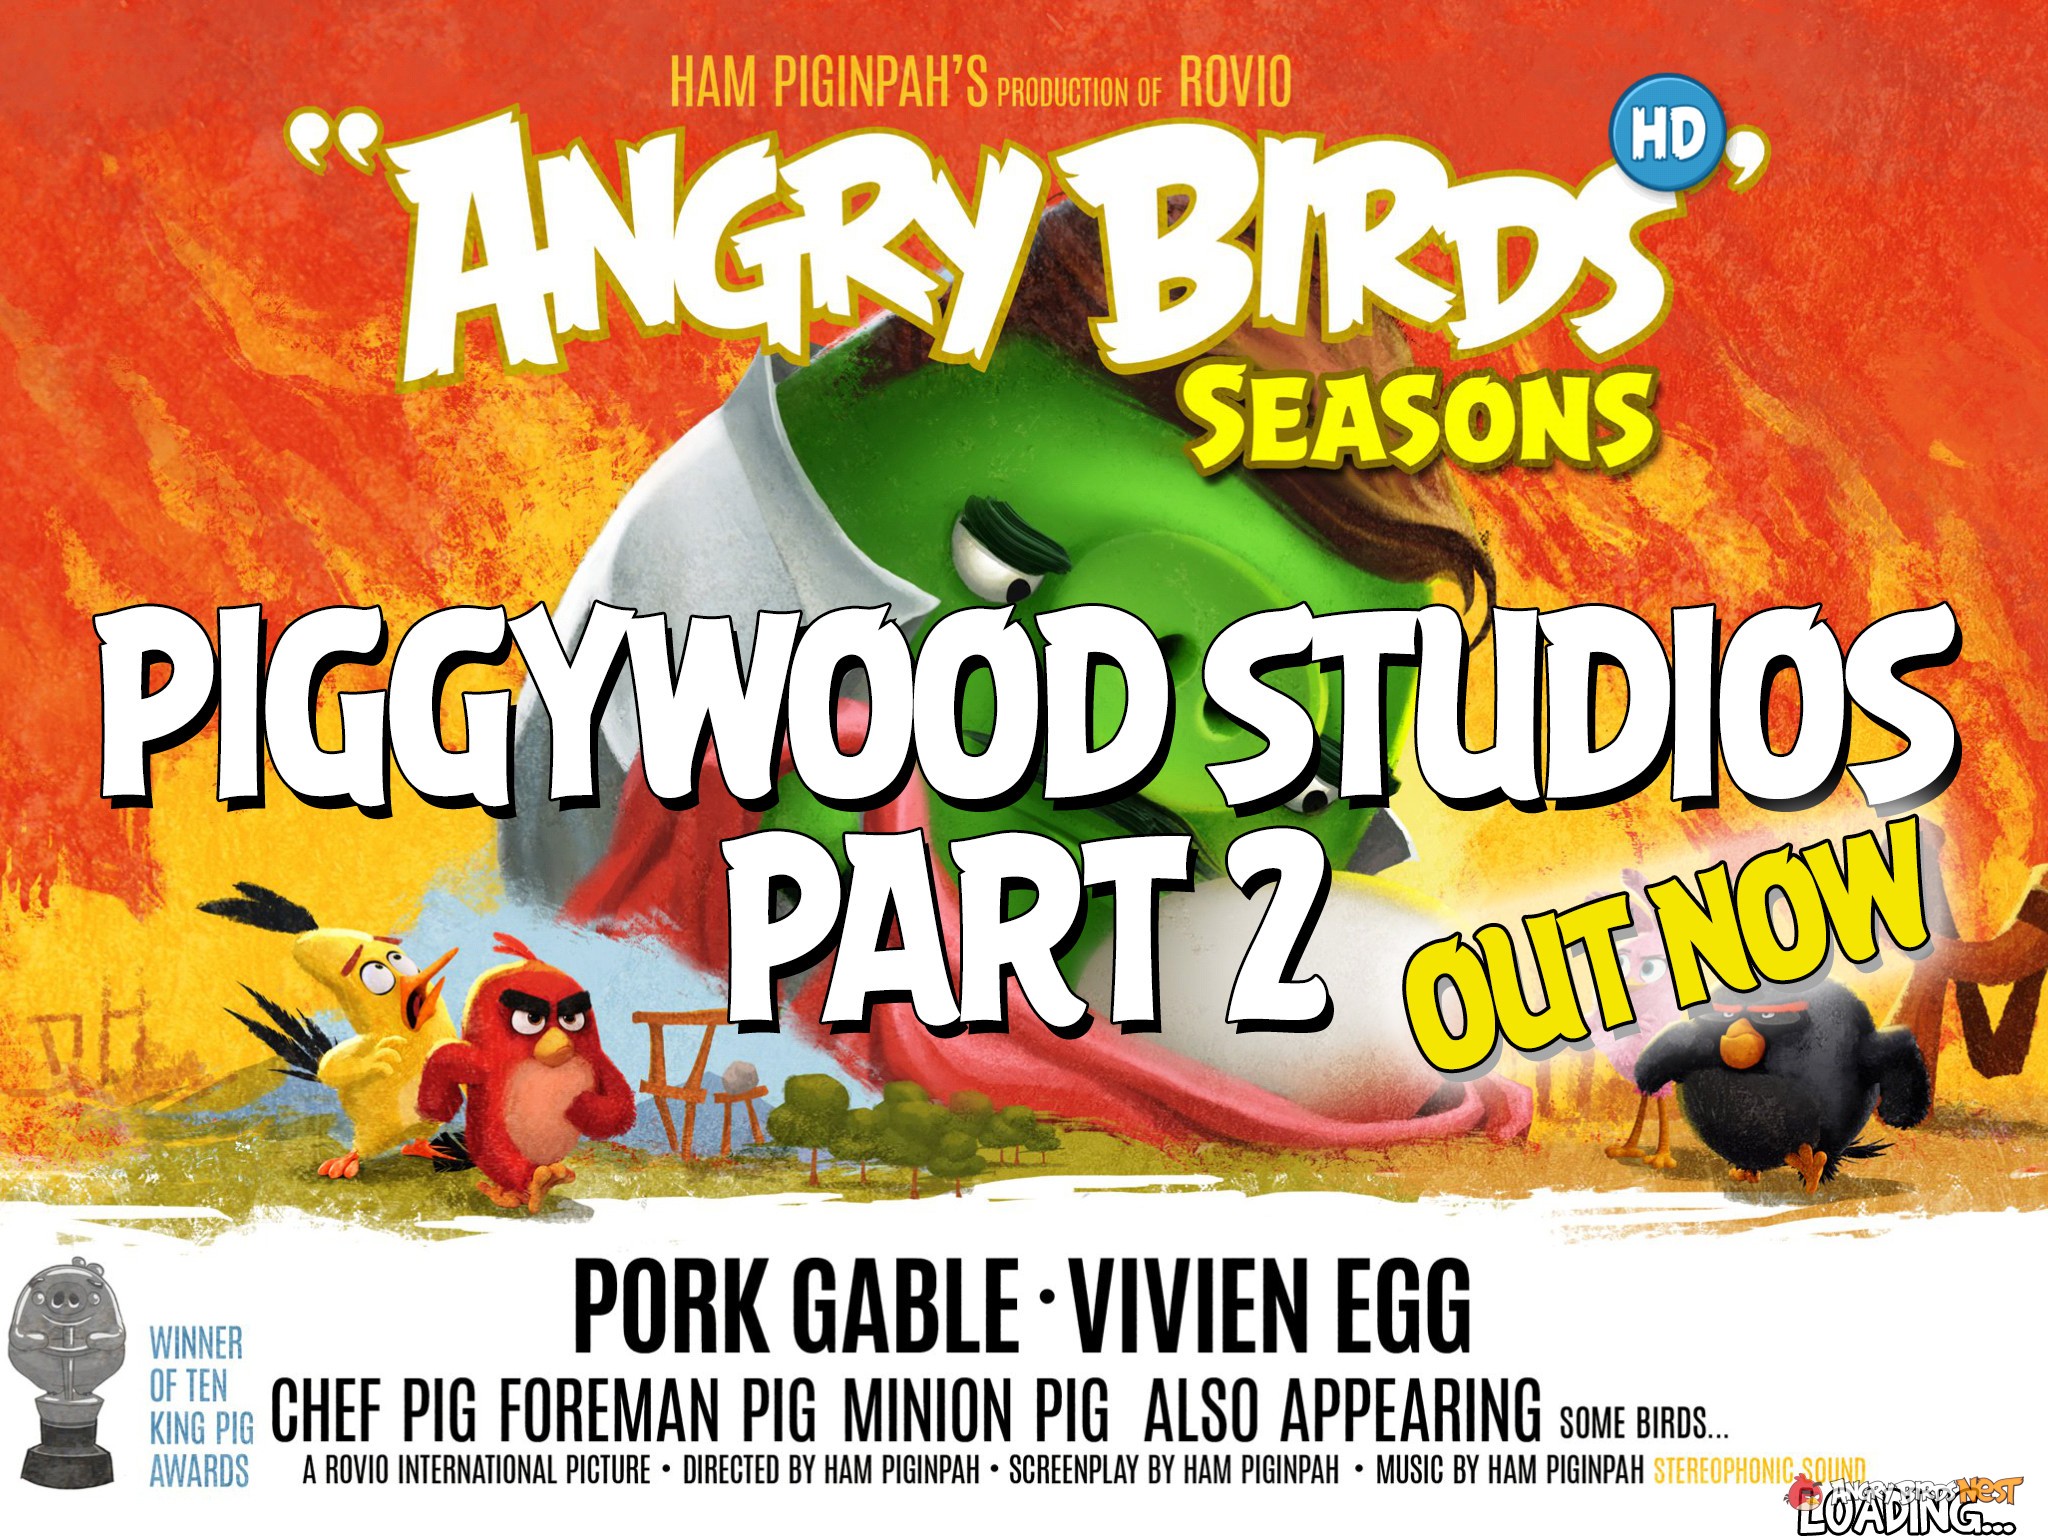 angry-birds-seasons-piggywood-studios-part-2-out-now